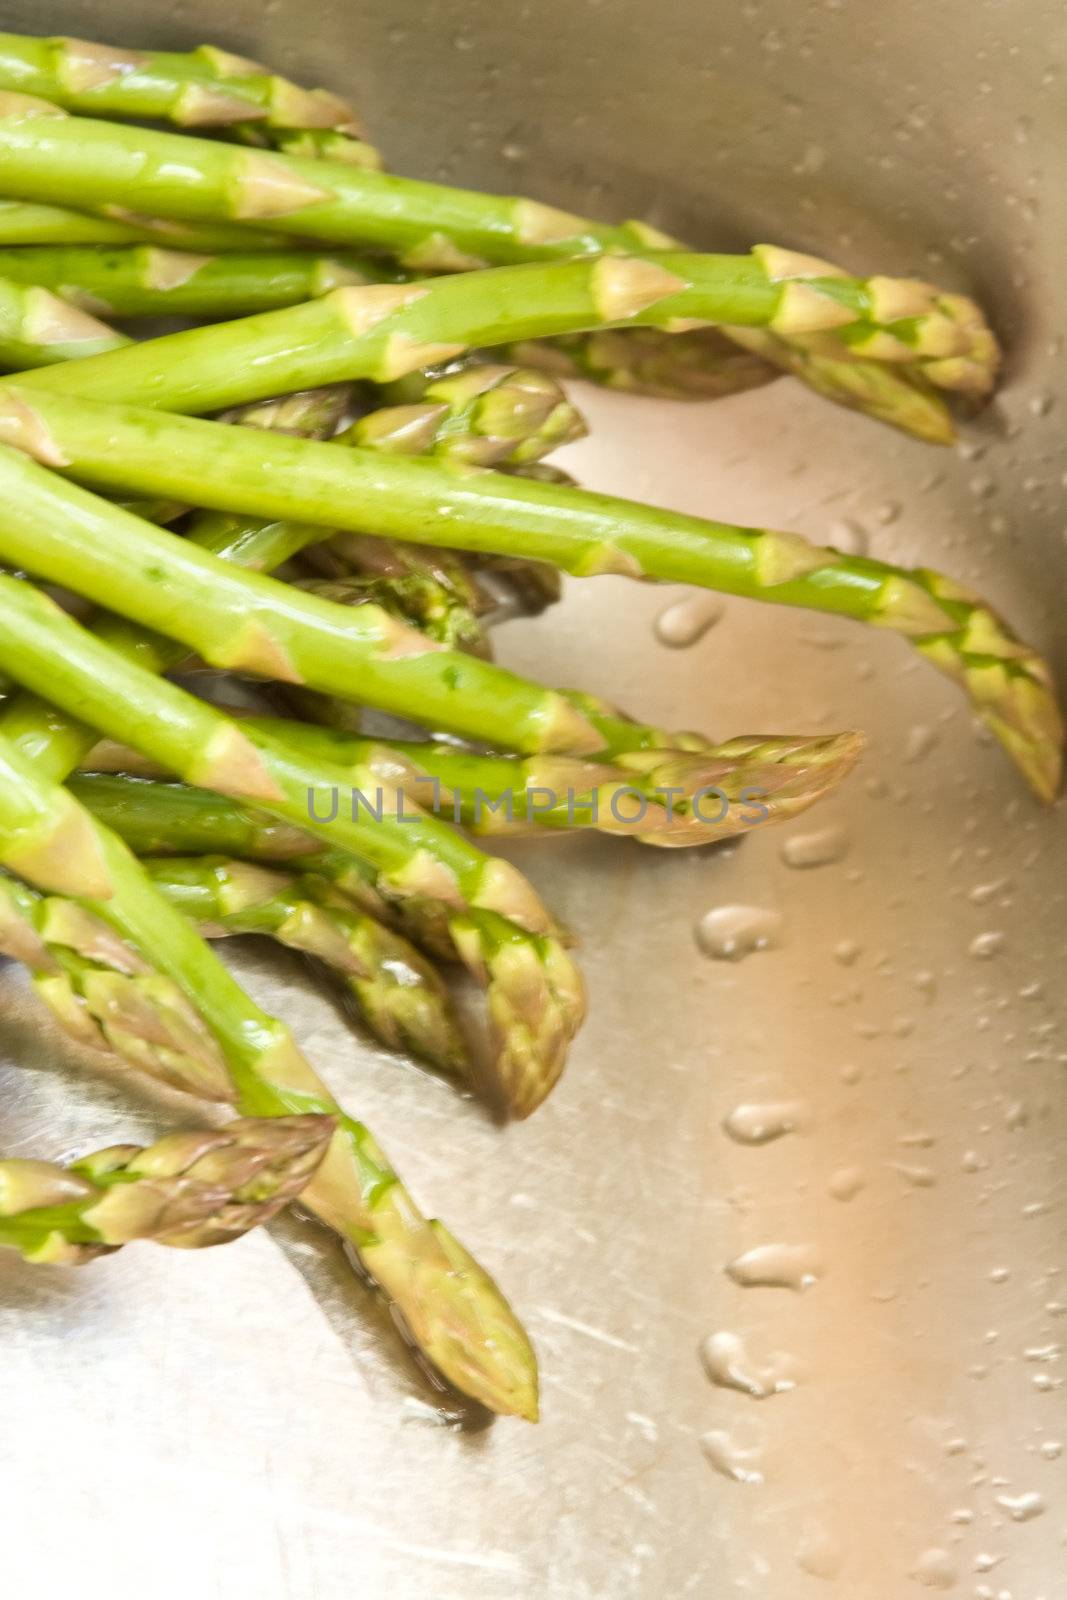 washing asparagus shot with a macro lens getting ready for a healthy dinner